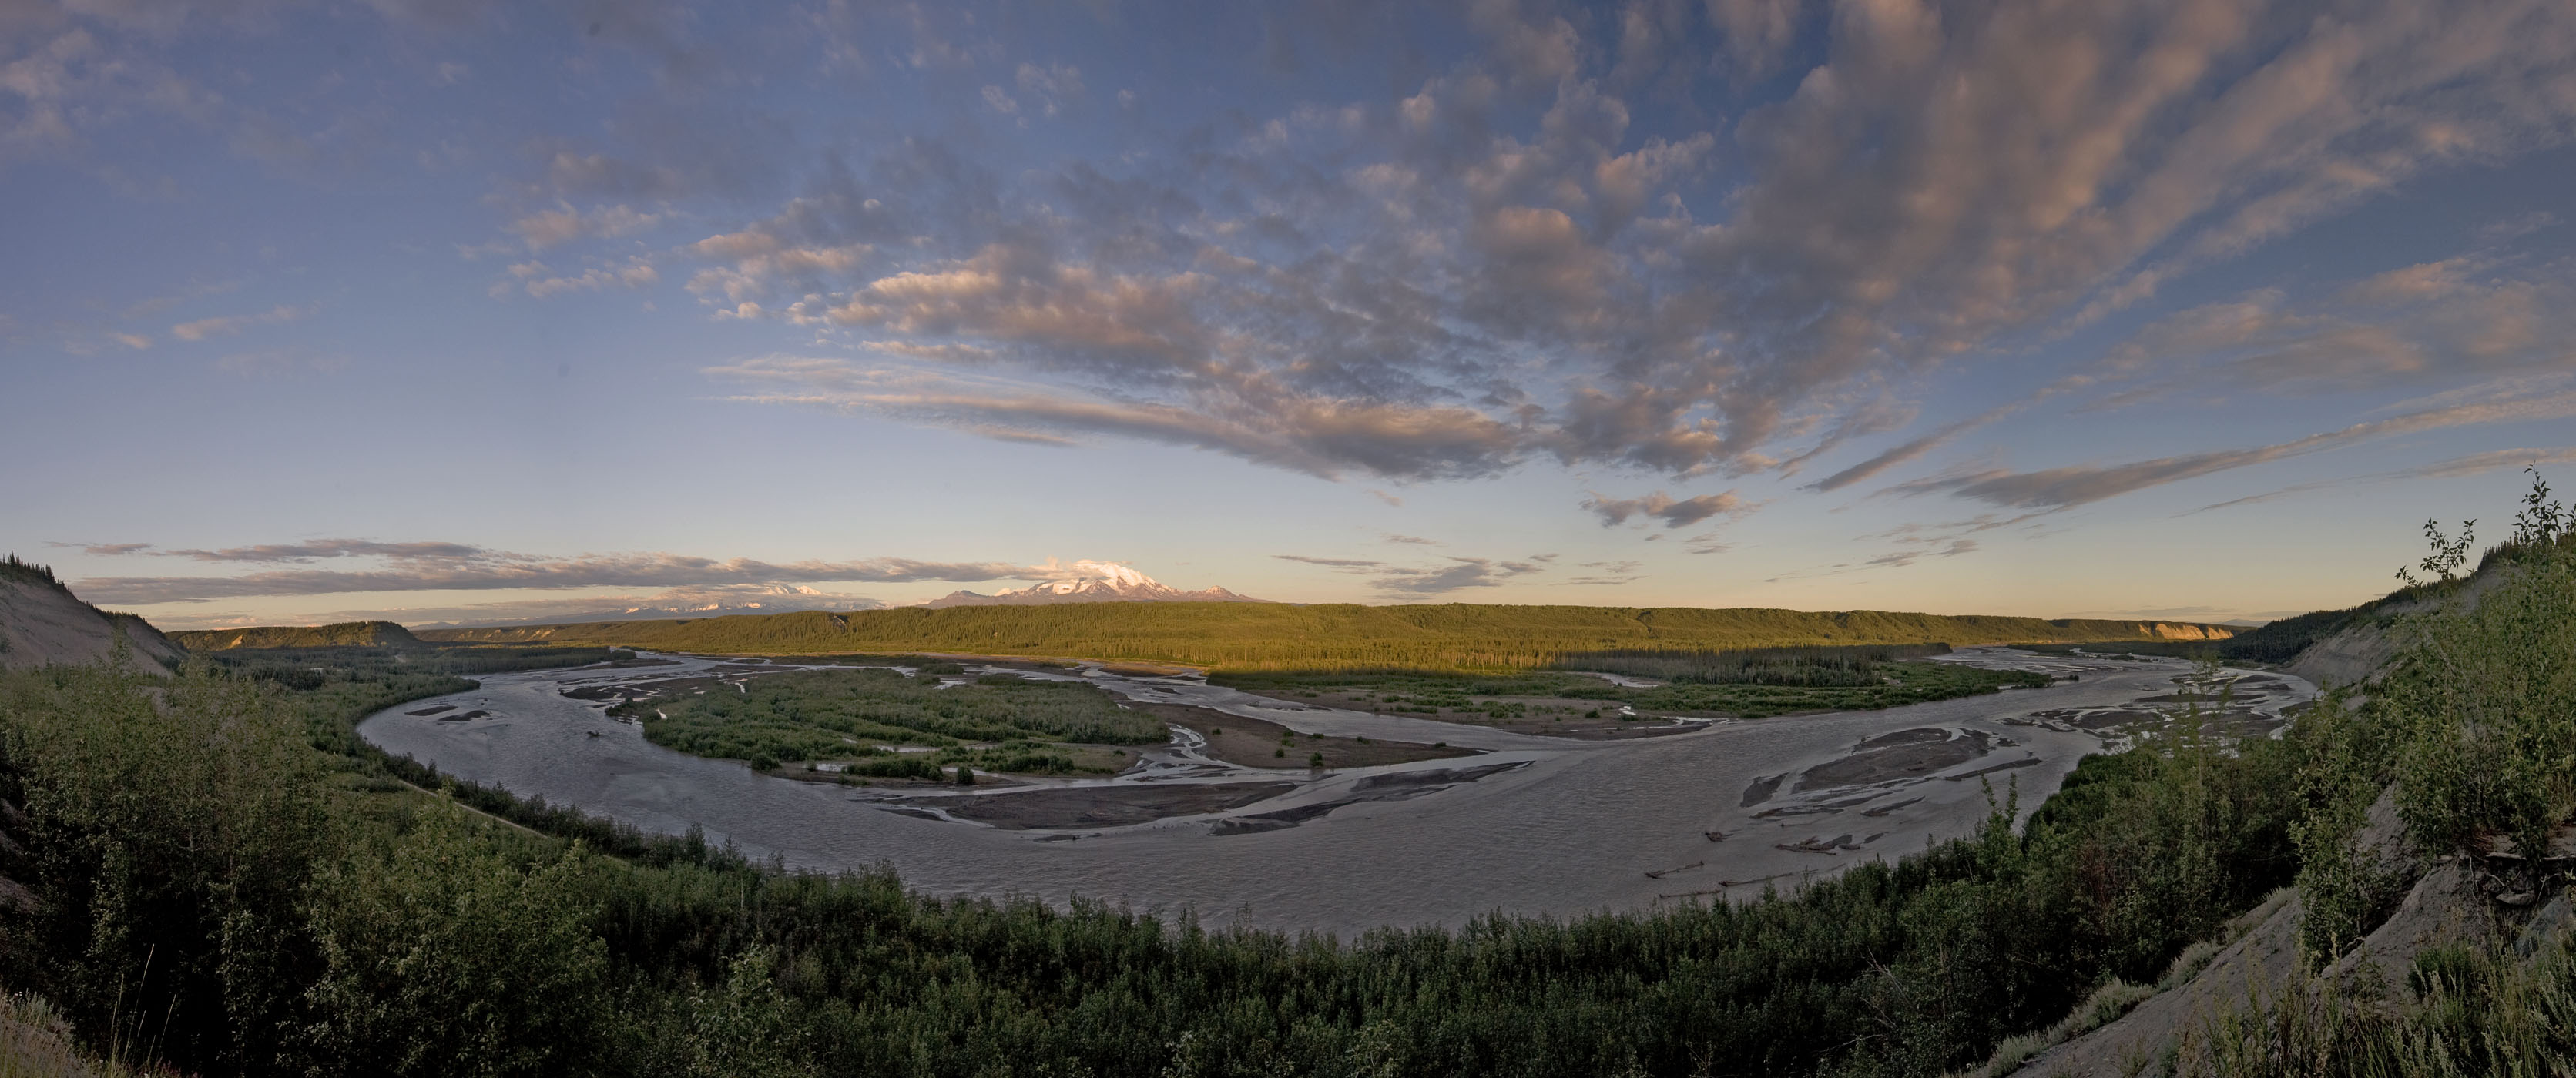 Another panorama of the huge Copper River. From the Copper River in Alaska.